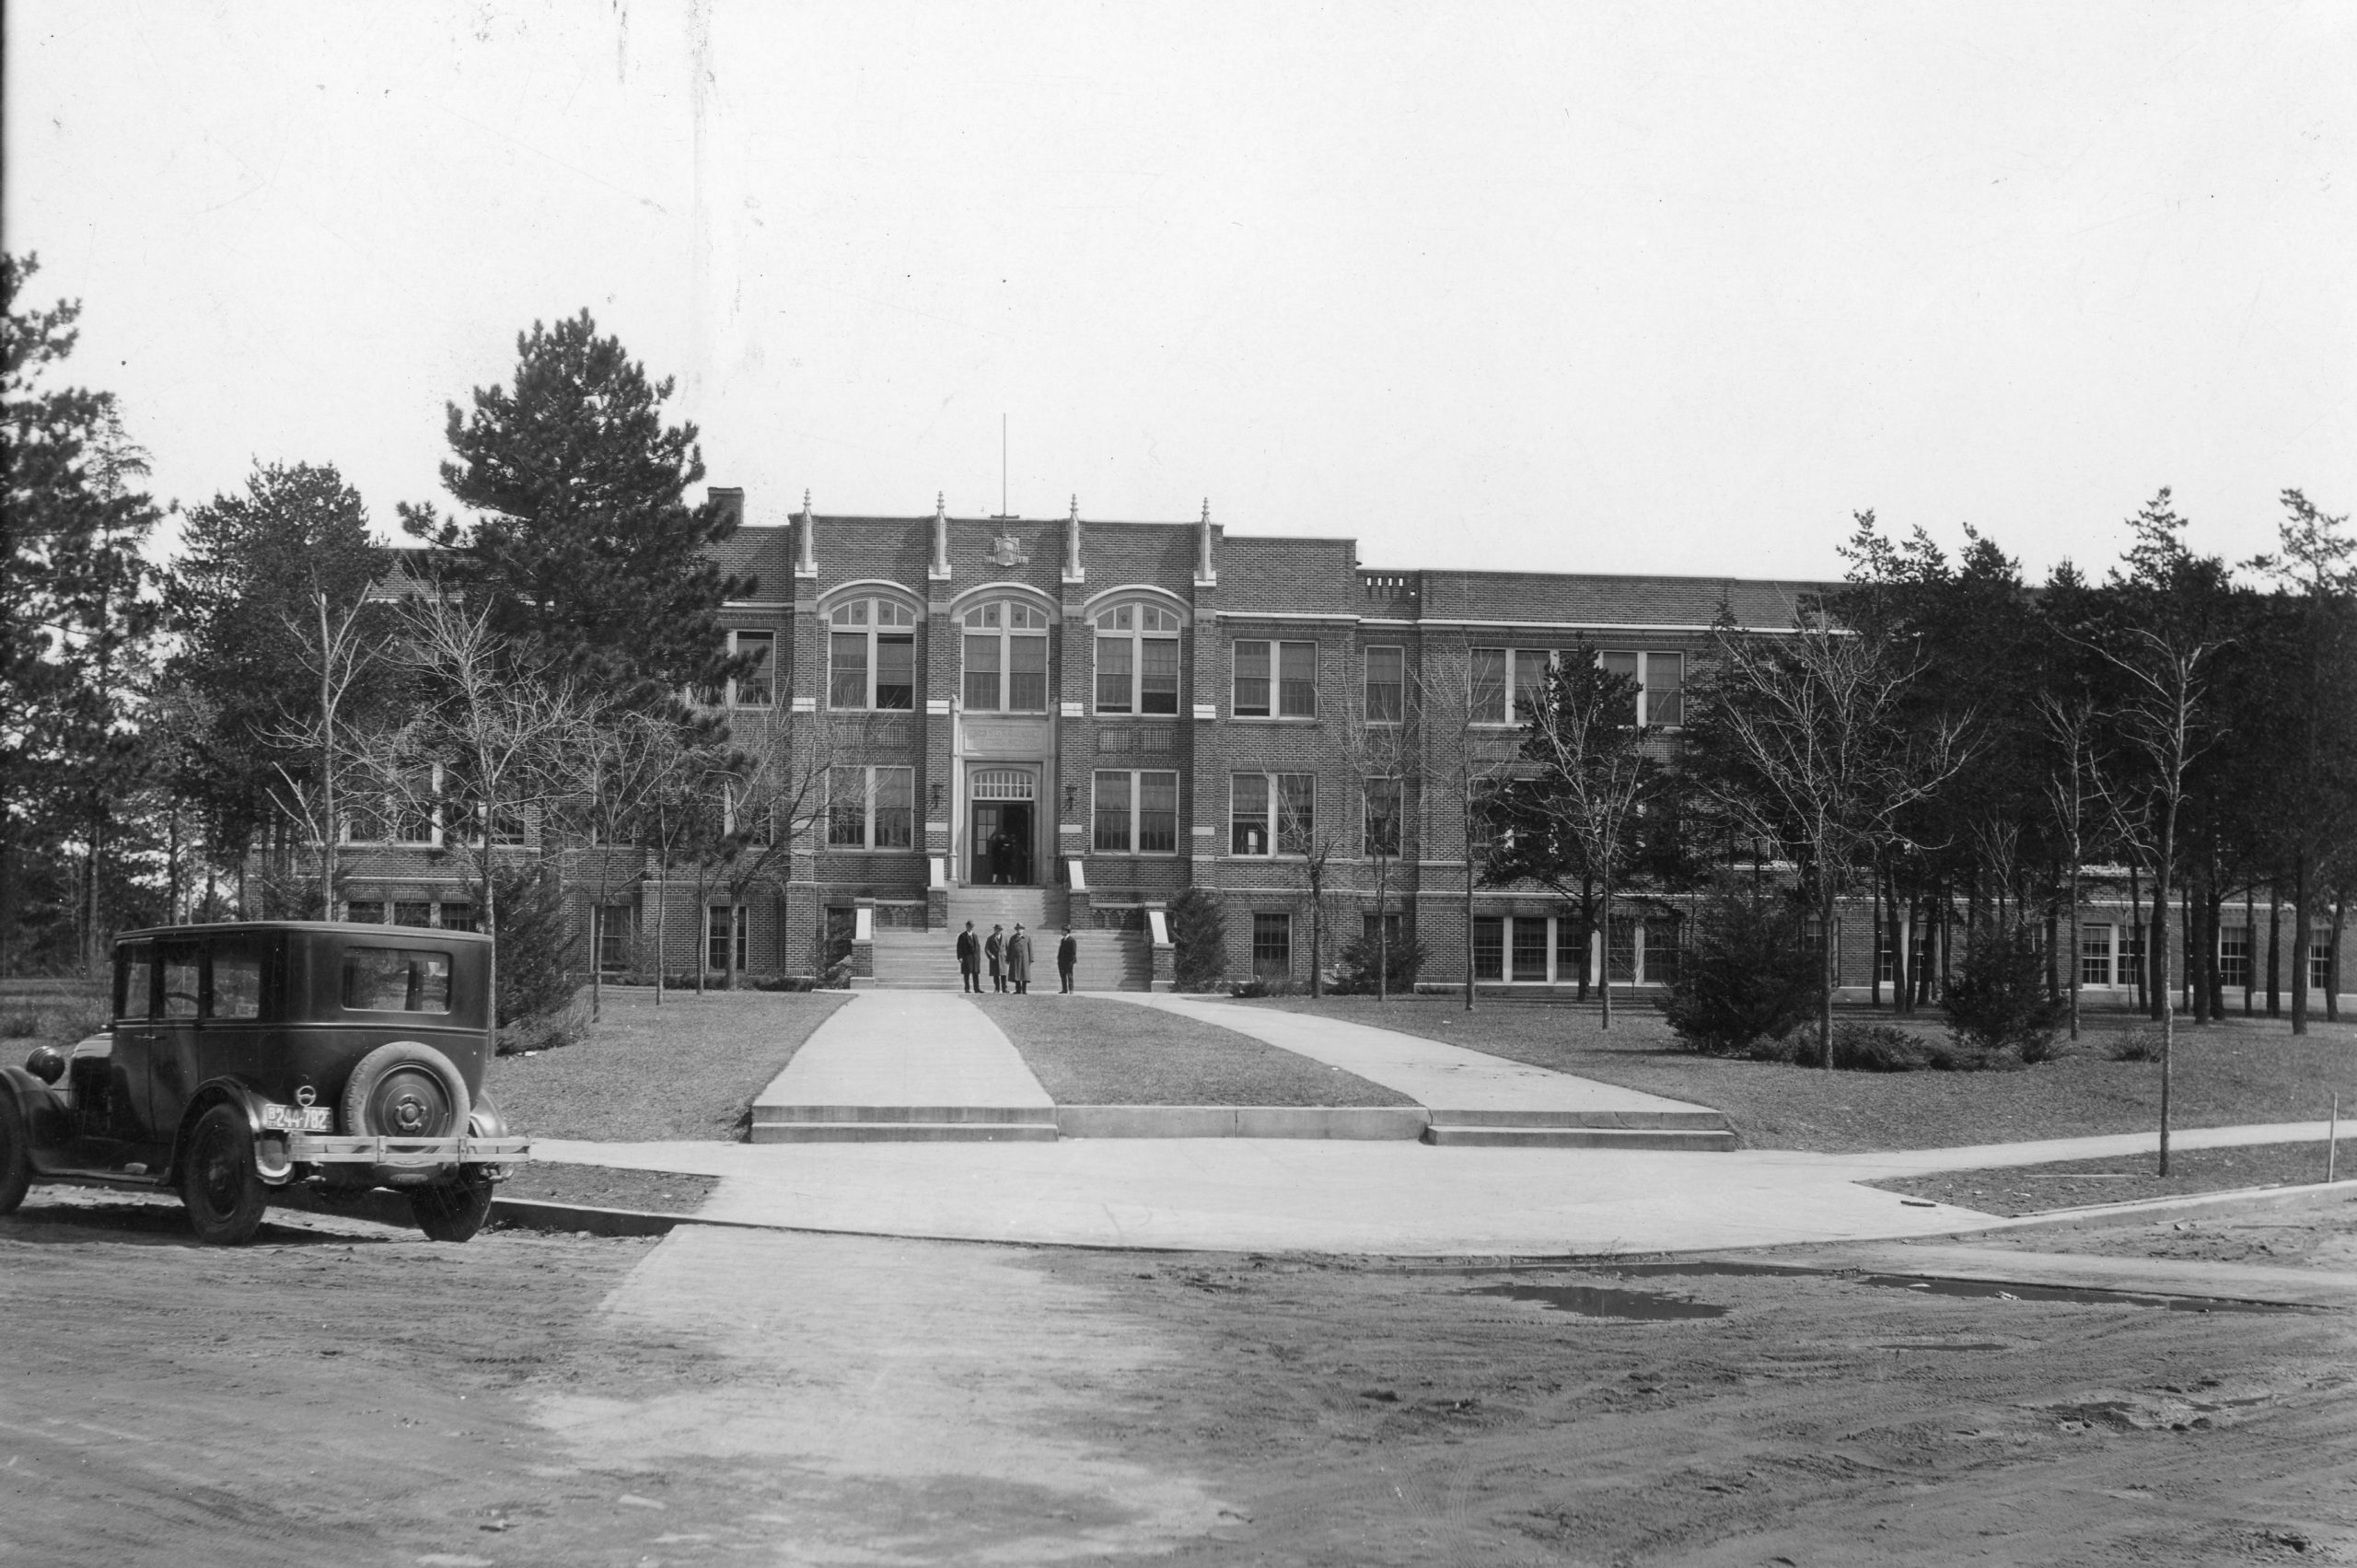 “The Main” in 1920, which remains today as Deputy Hall.